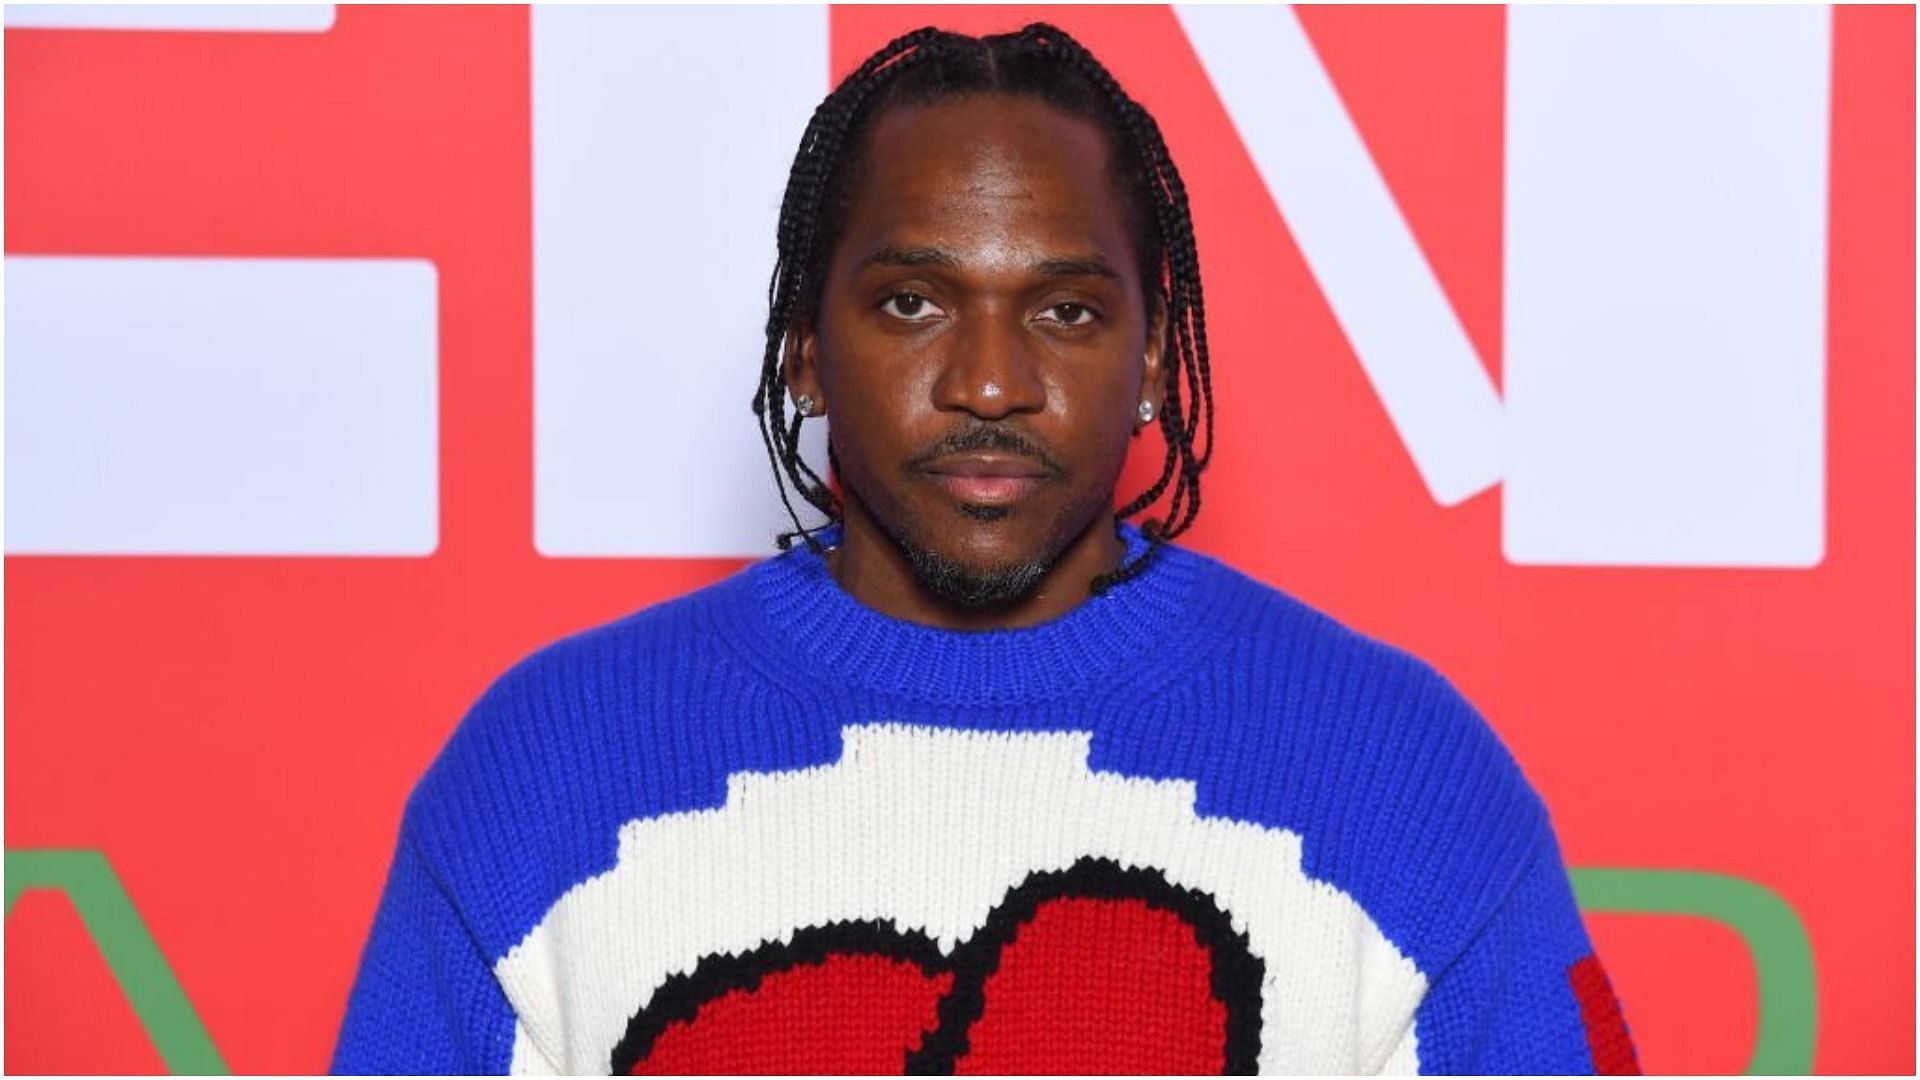 Pusha T is now trending on the internet for his new song (Image via Stephane Cardinale/Getty Images)